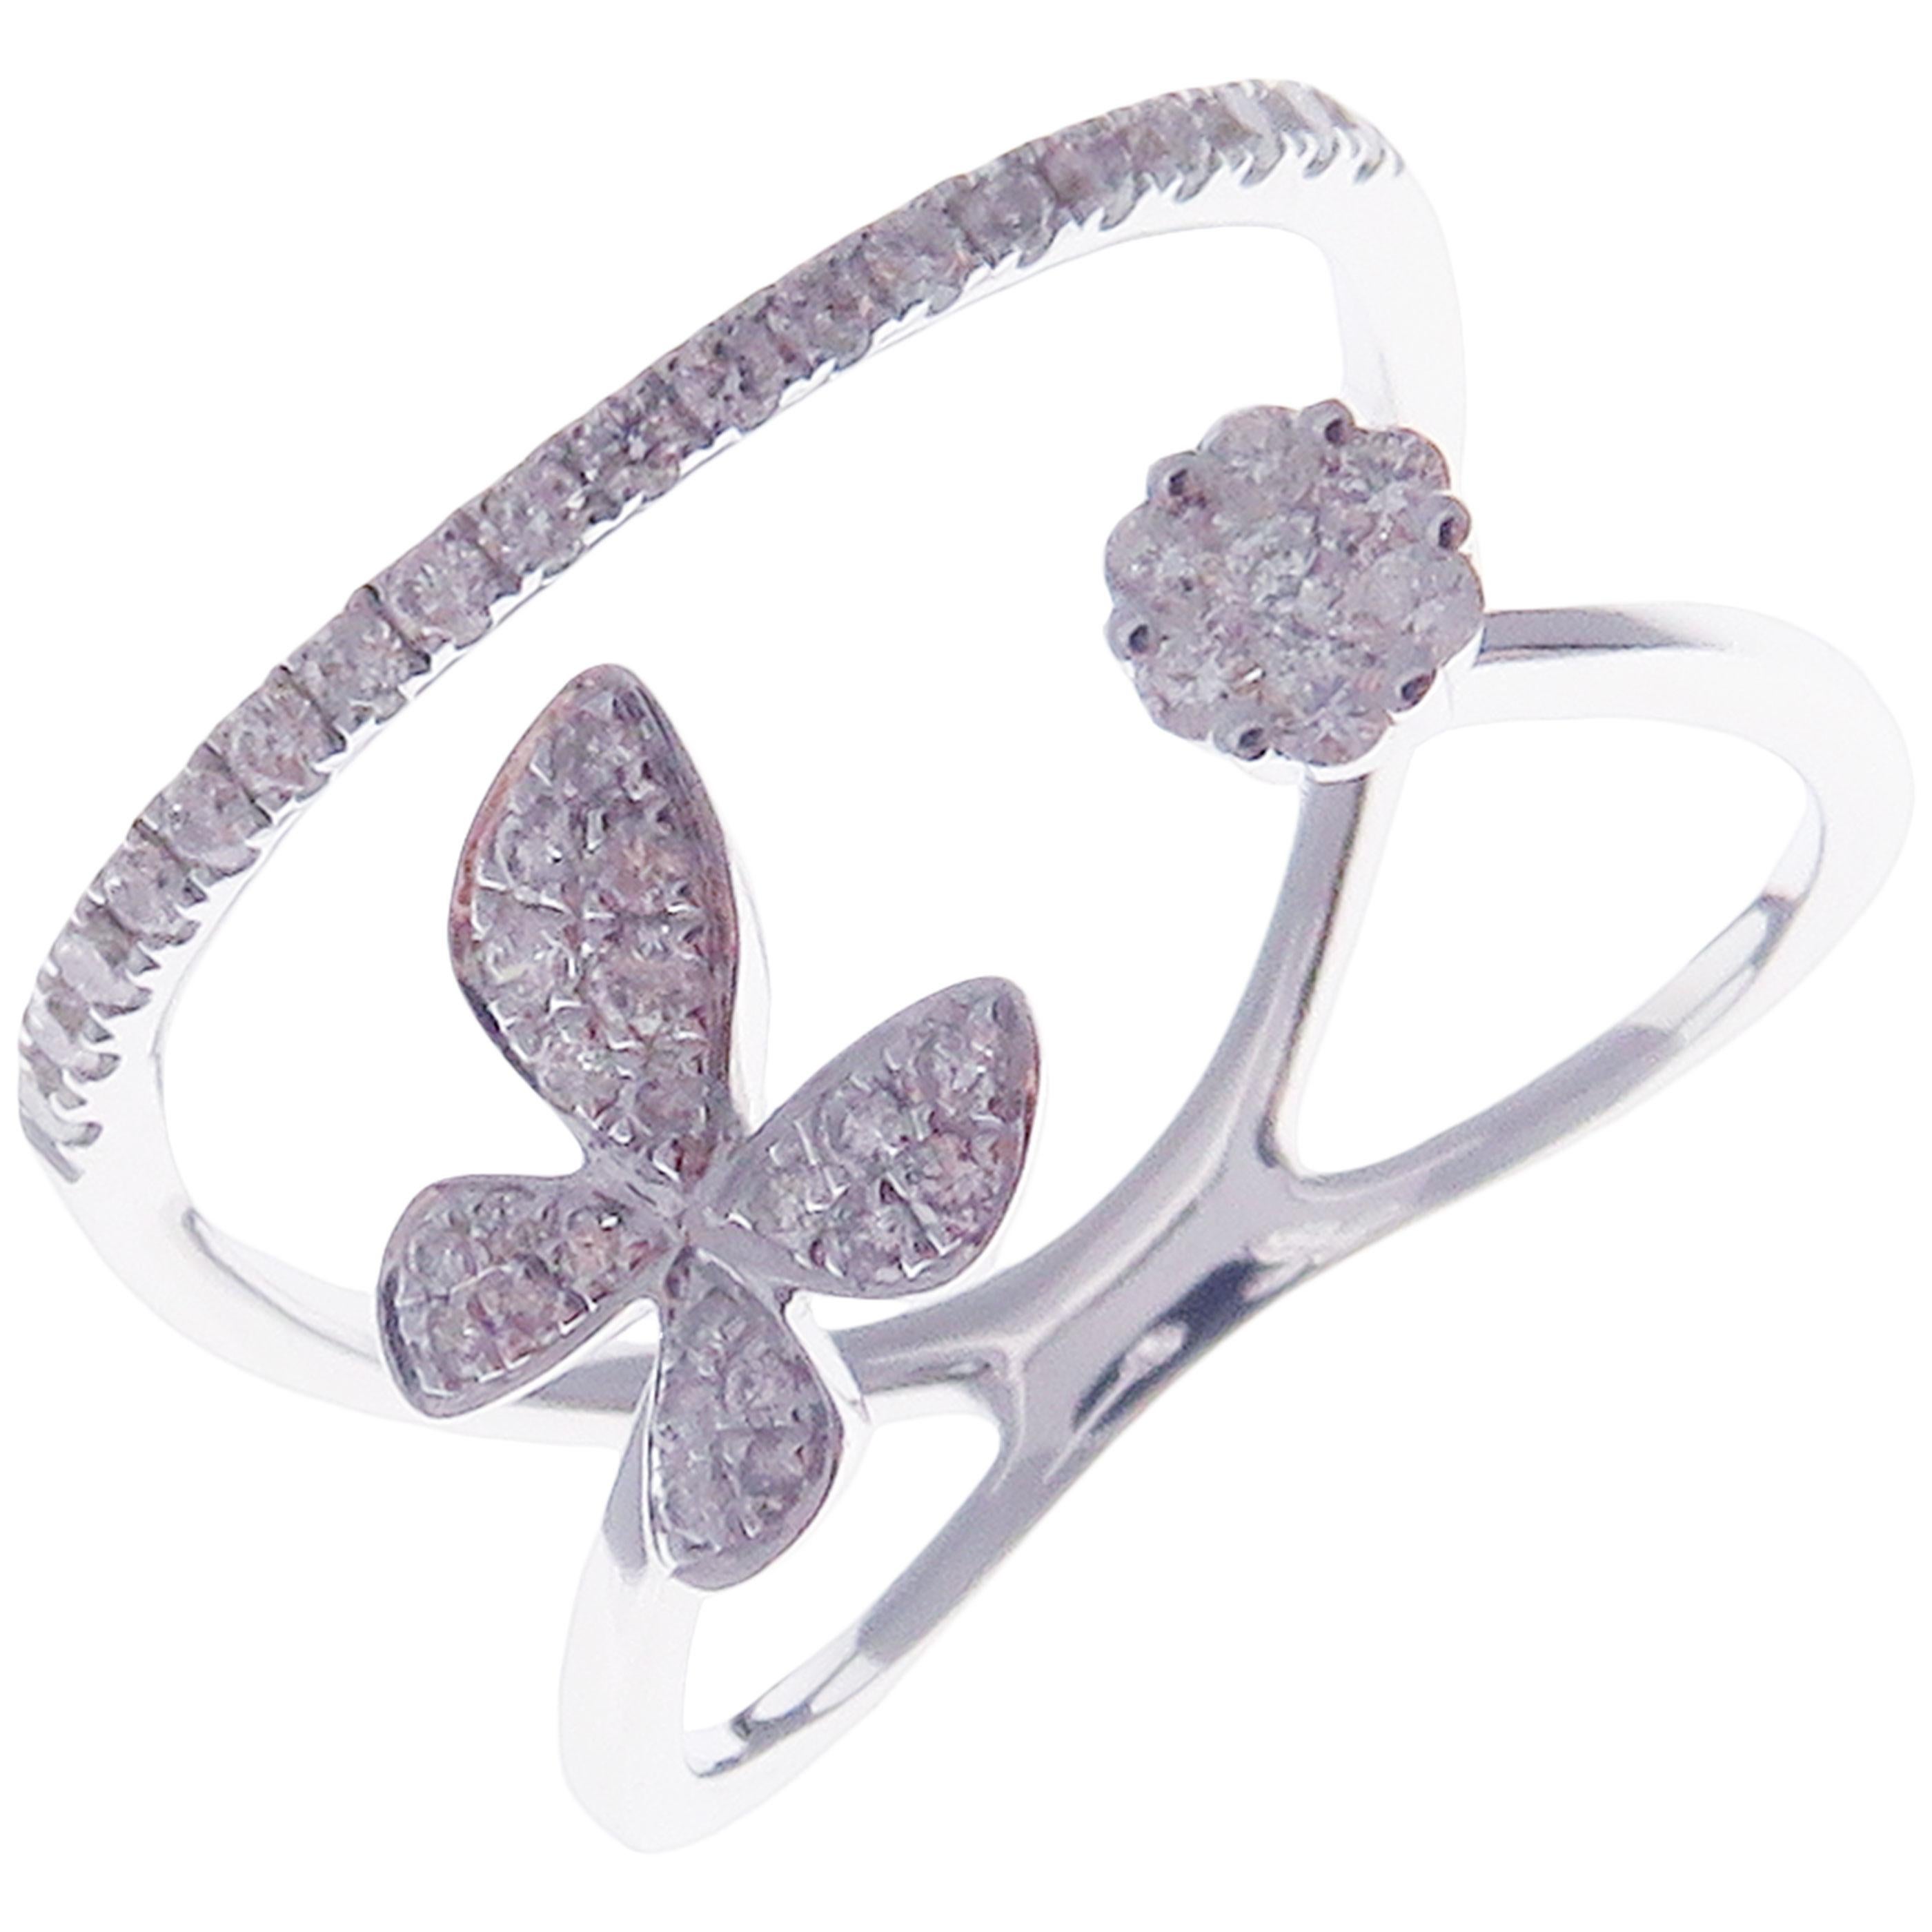 This trendy multi-layer butterfly ring is crafted in 18-karat white gold, featuring 48 round white diamonds totaling of 0.37 carats.
Approximate total weight 3.27 grams.
Standard Ring size 7
SI-G Quality natural white diamonds.